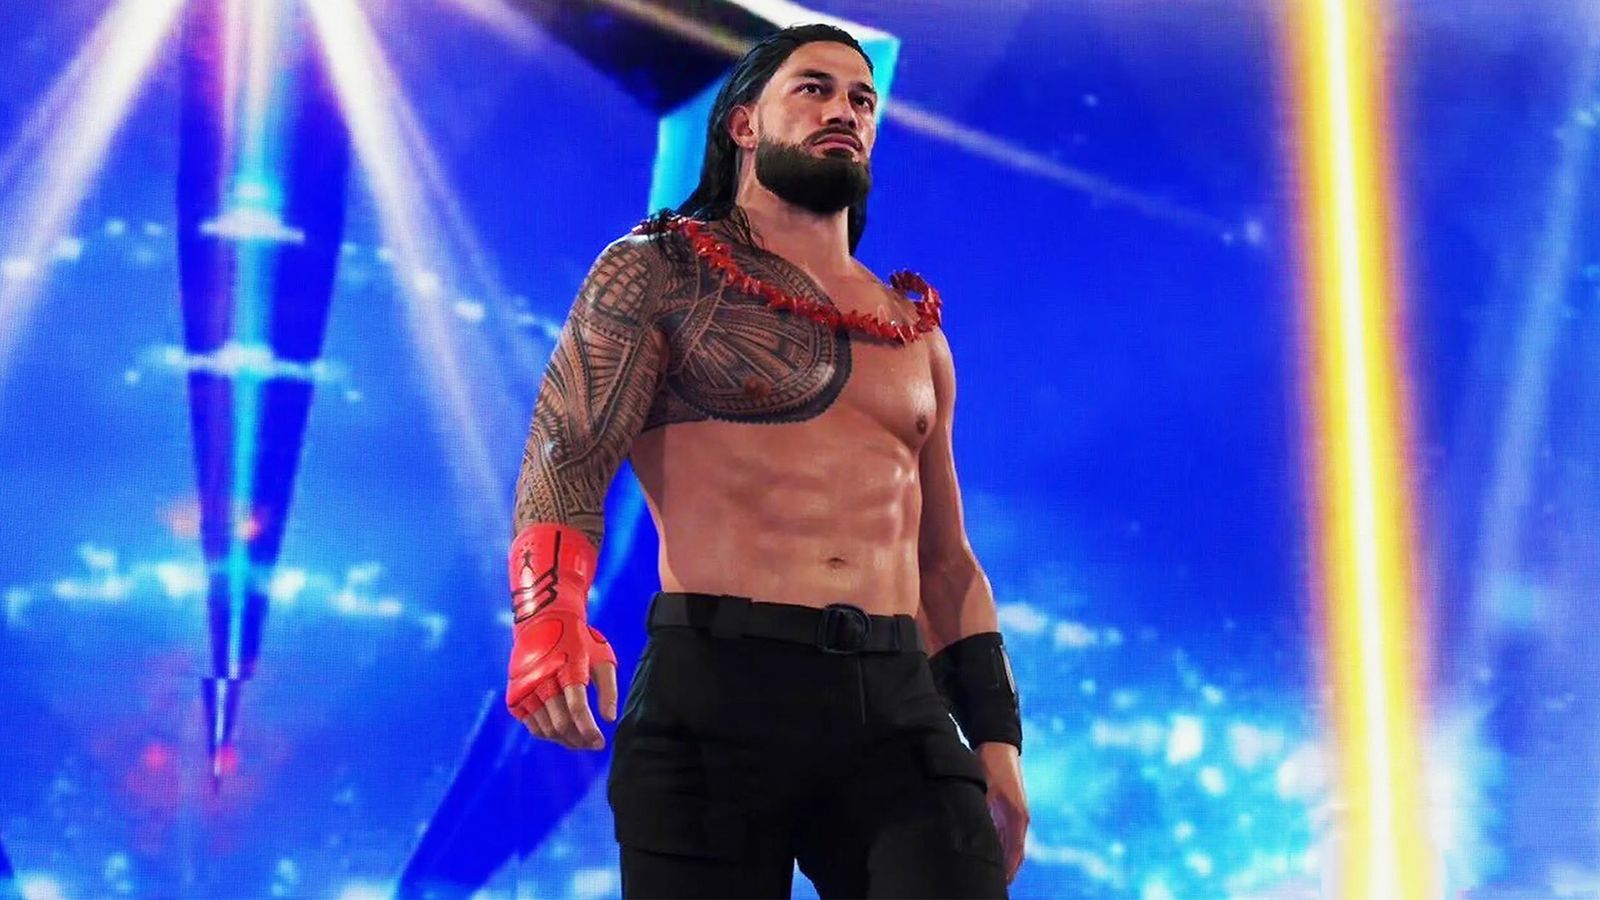 WWE 2K Roman Reigns wearing red tribal necklace on blue background